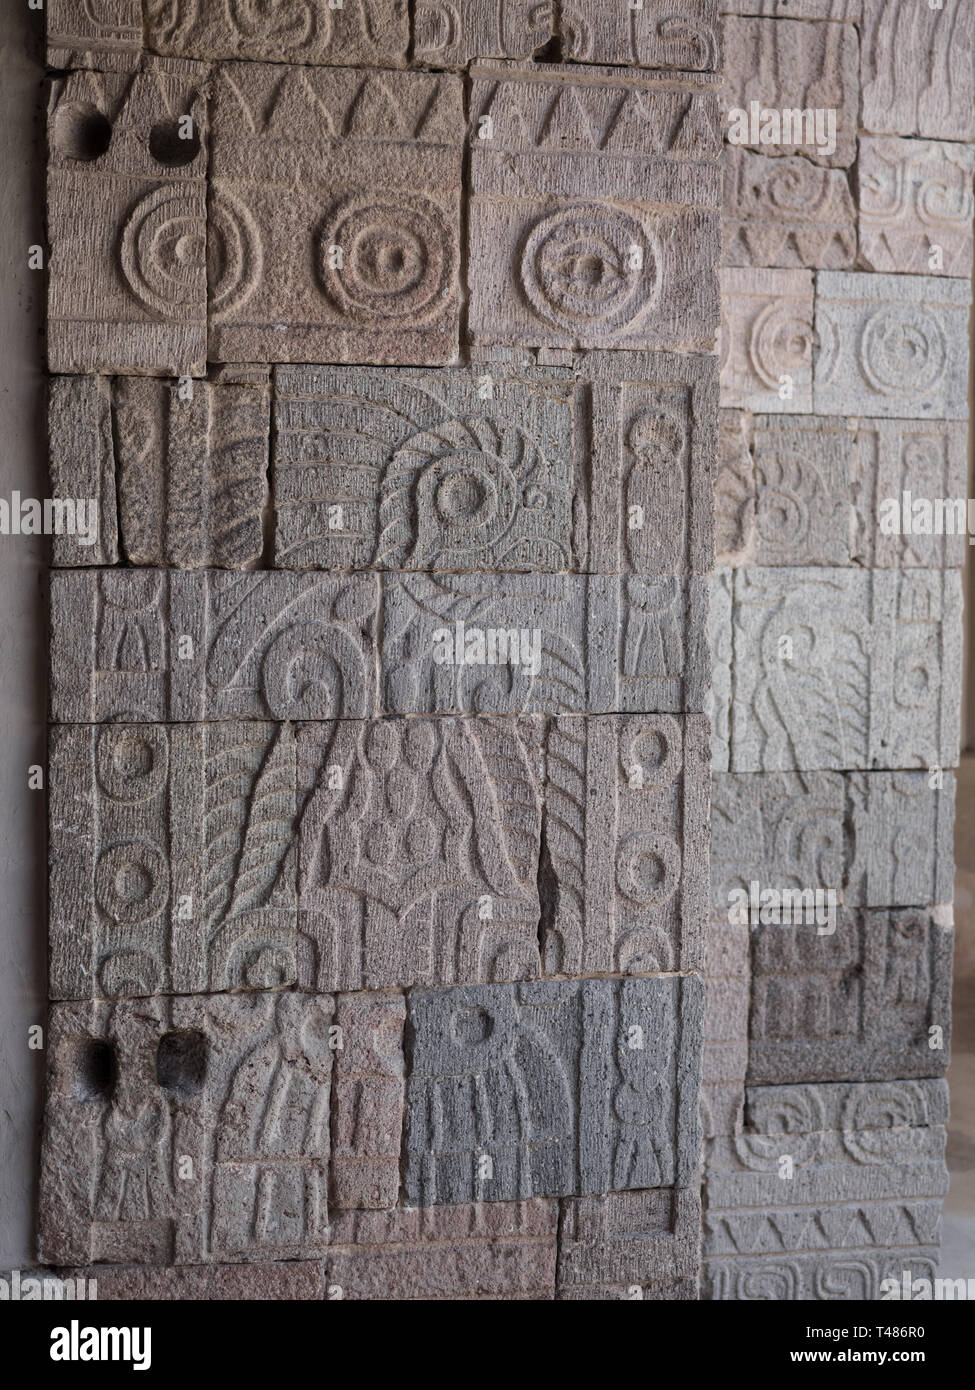 Intricate carvings on stone walls at Teotihuacan Stock Photo